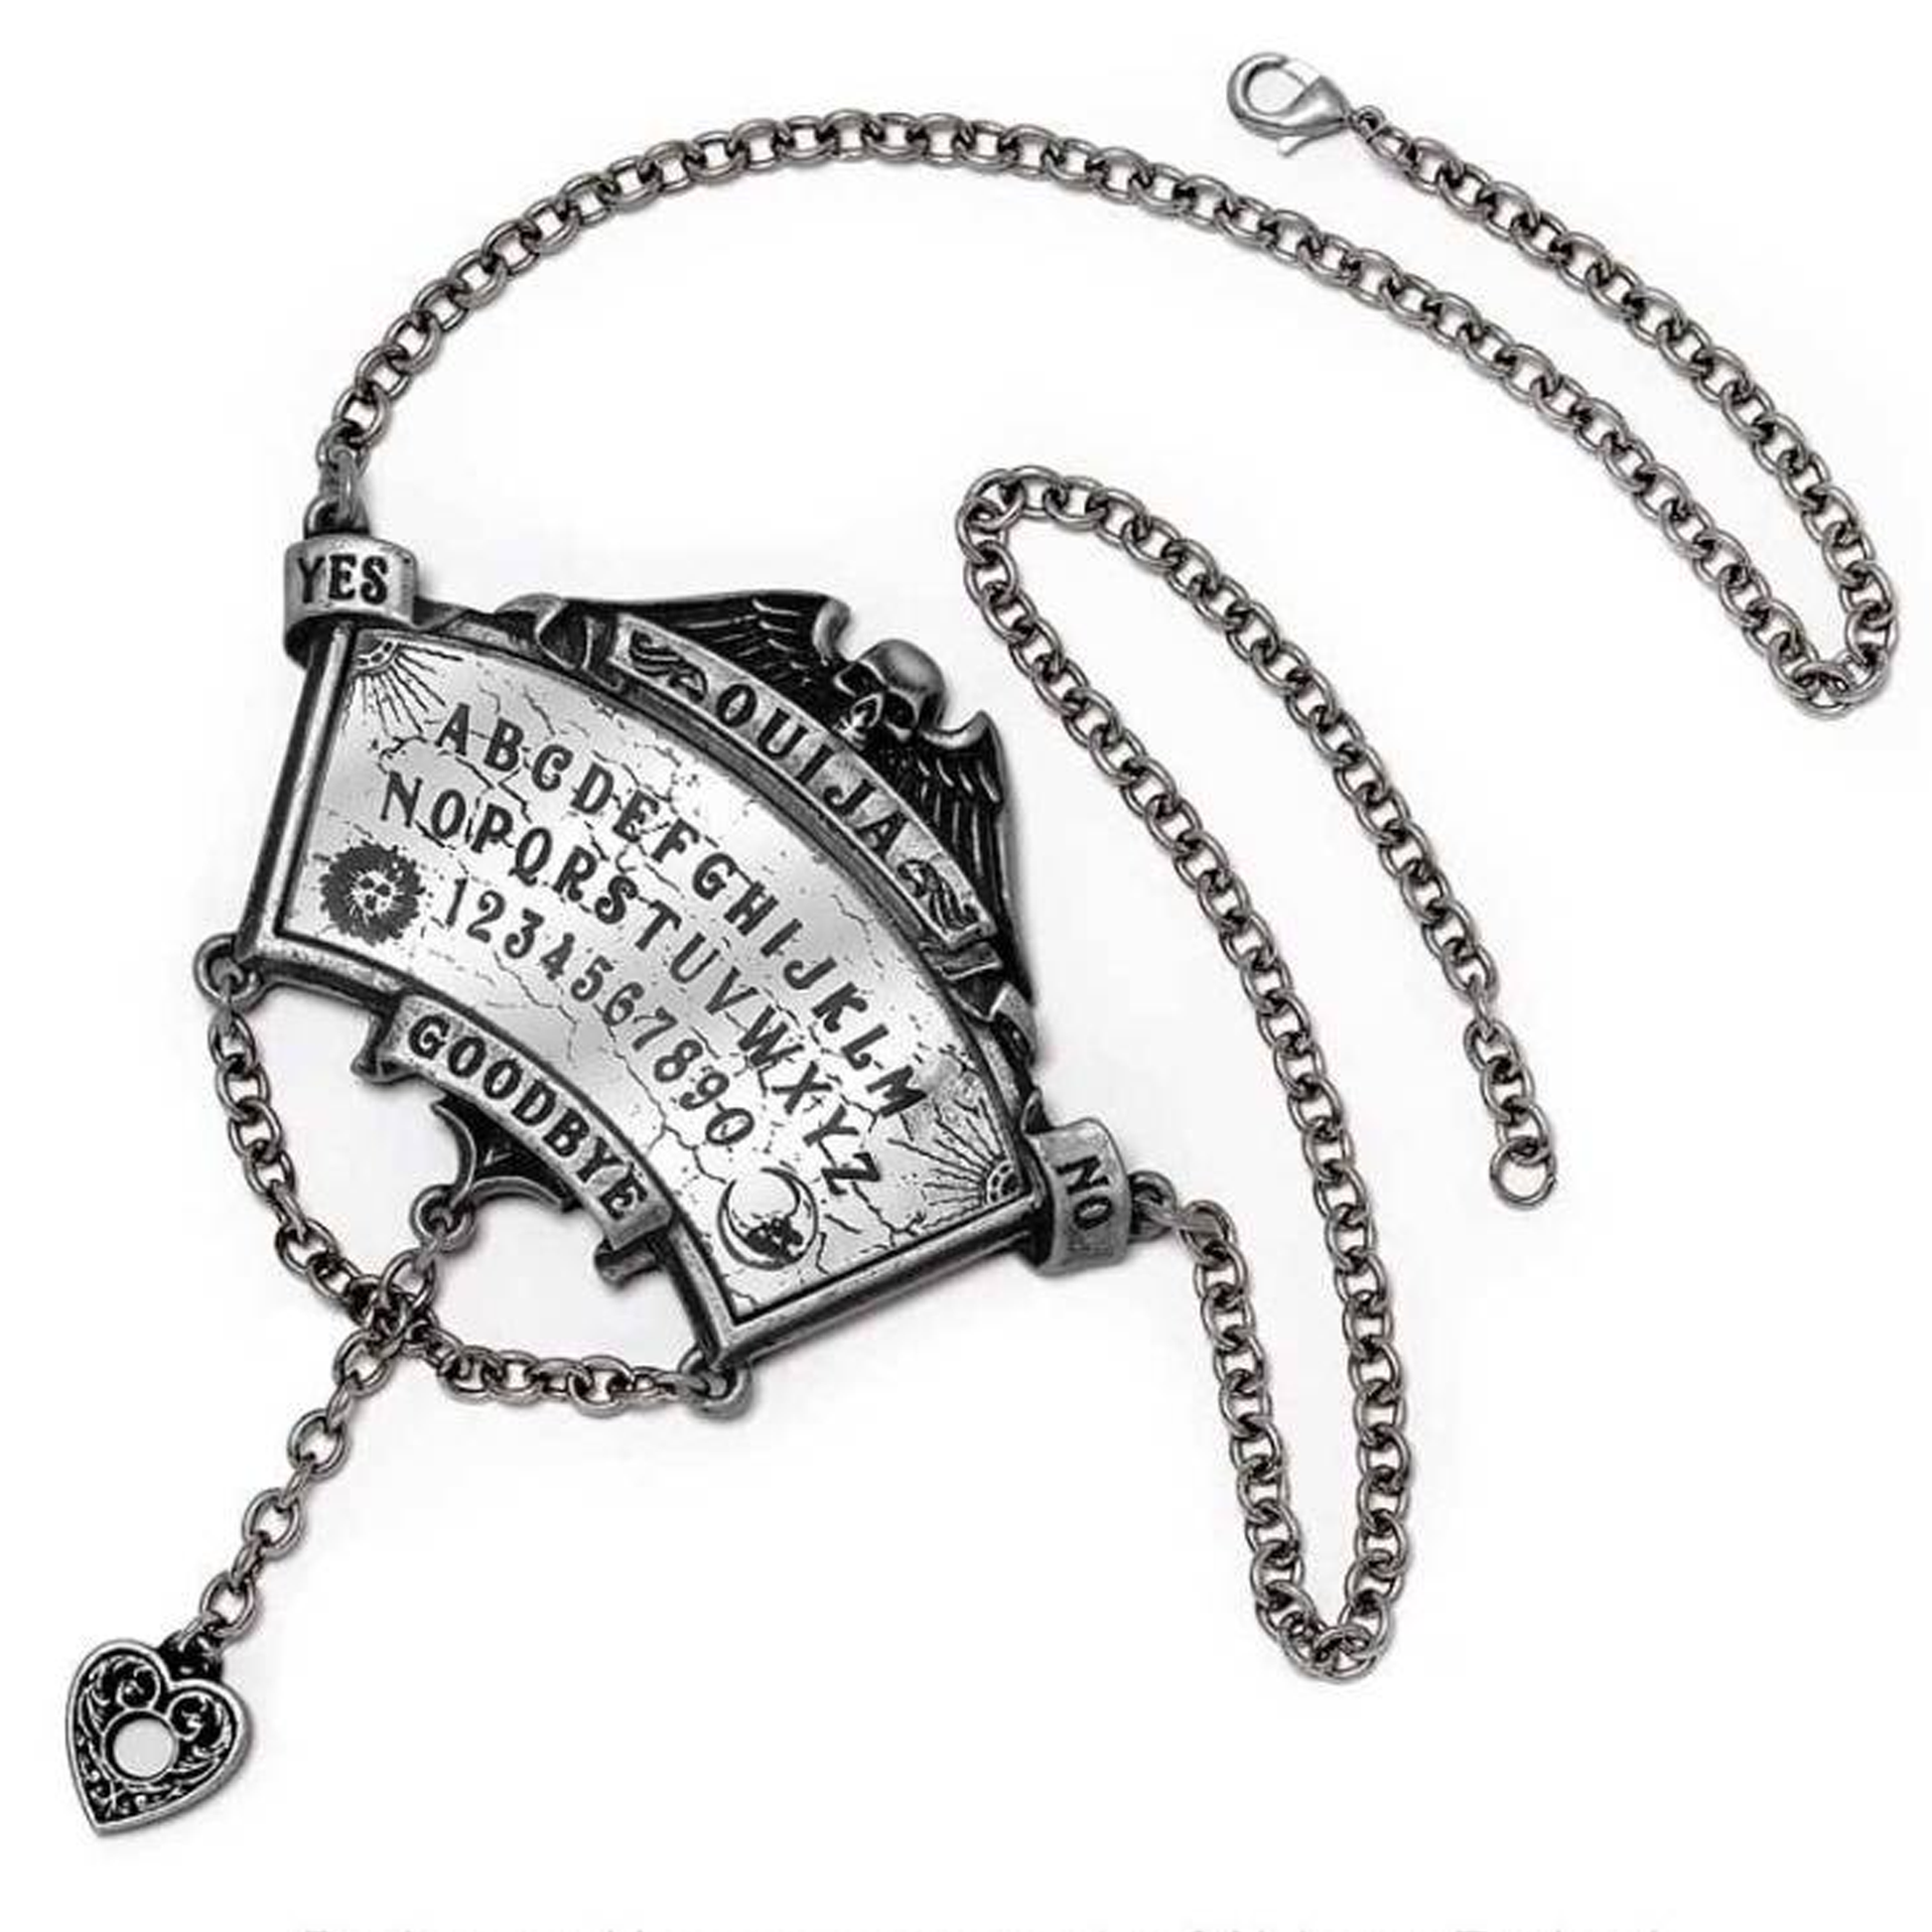 Crowley's Spirit Board - Pewter Ouija Necklace and Chain | Happy Piranha